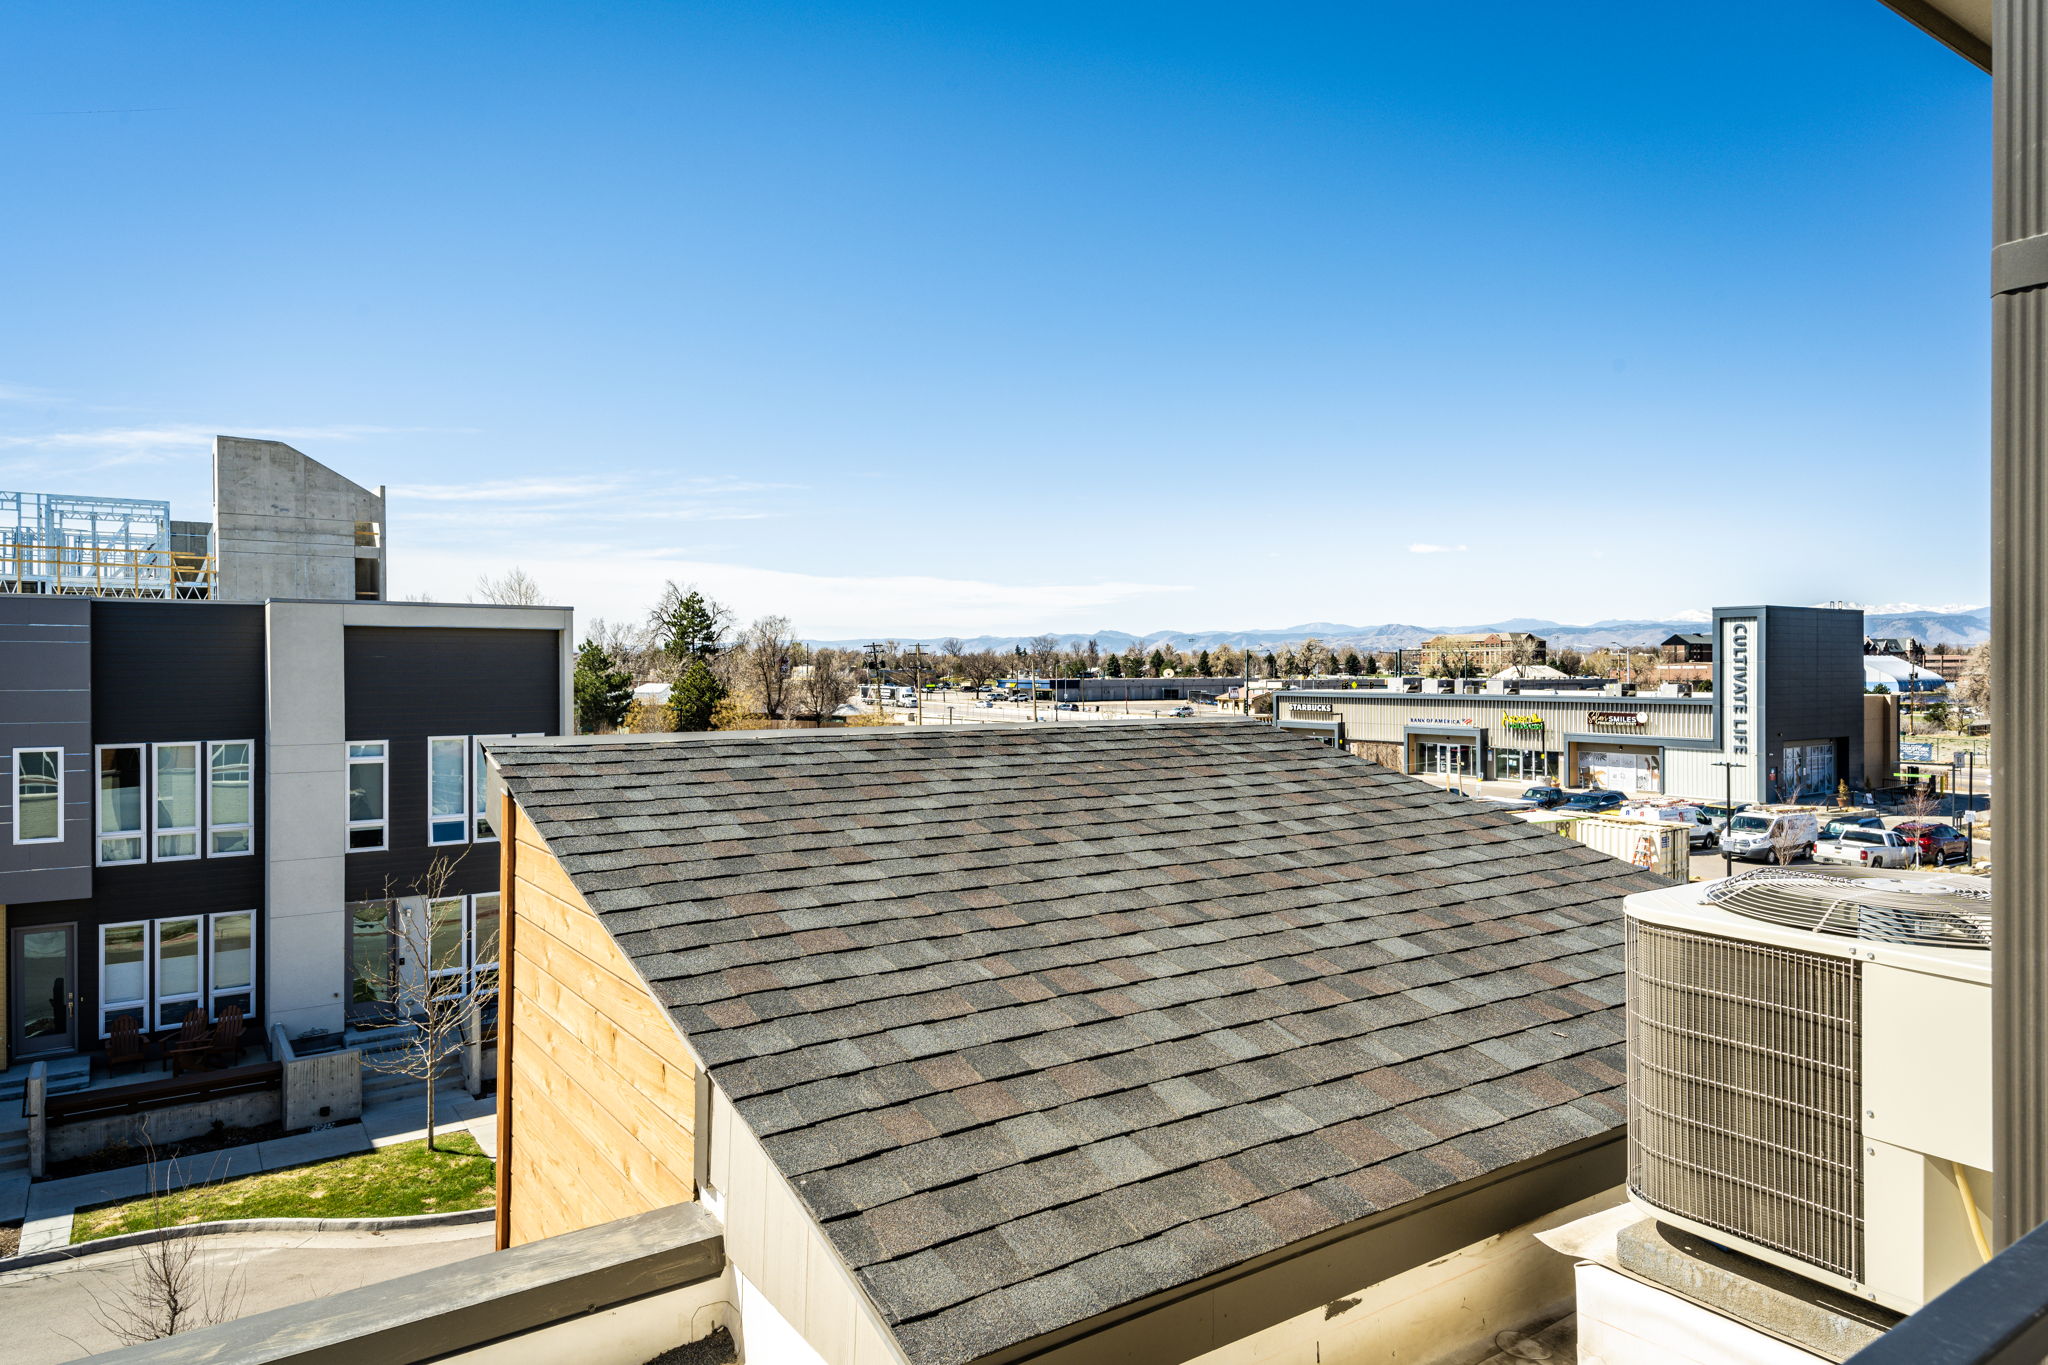 Extended area of the rooftop deck & view. Located close to Regis University, Chaffee Park, Tennyson, Sunnyside, Highlands & Berkeley! Easy access to Downtown Denver and the mountains.